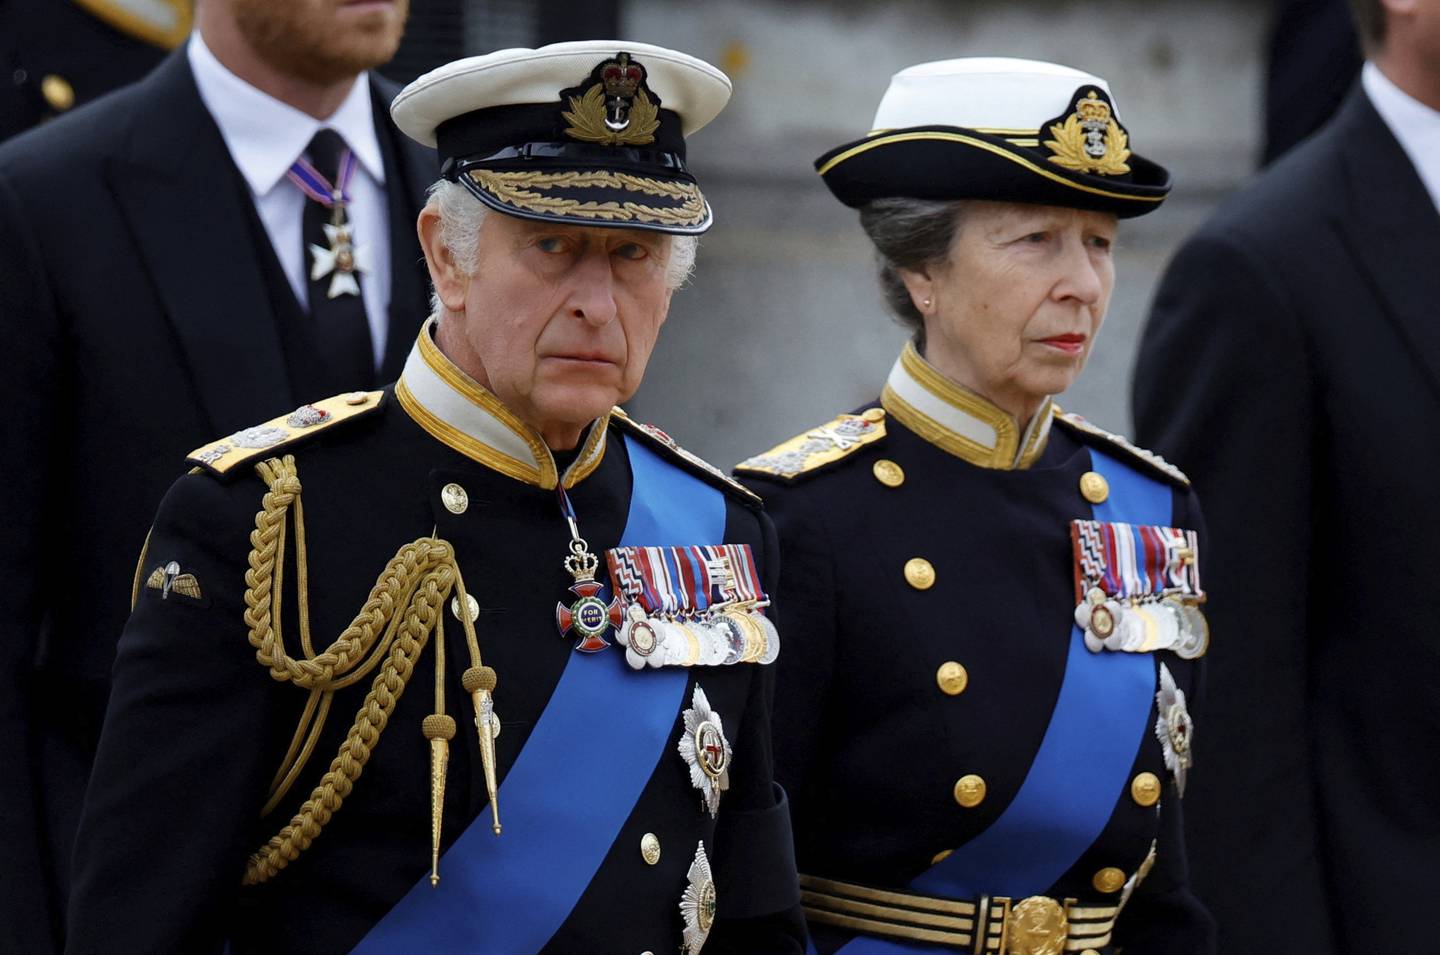 King Charles III and Princess Anne arrive at Westminster Abbey. AP Photo